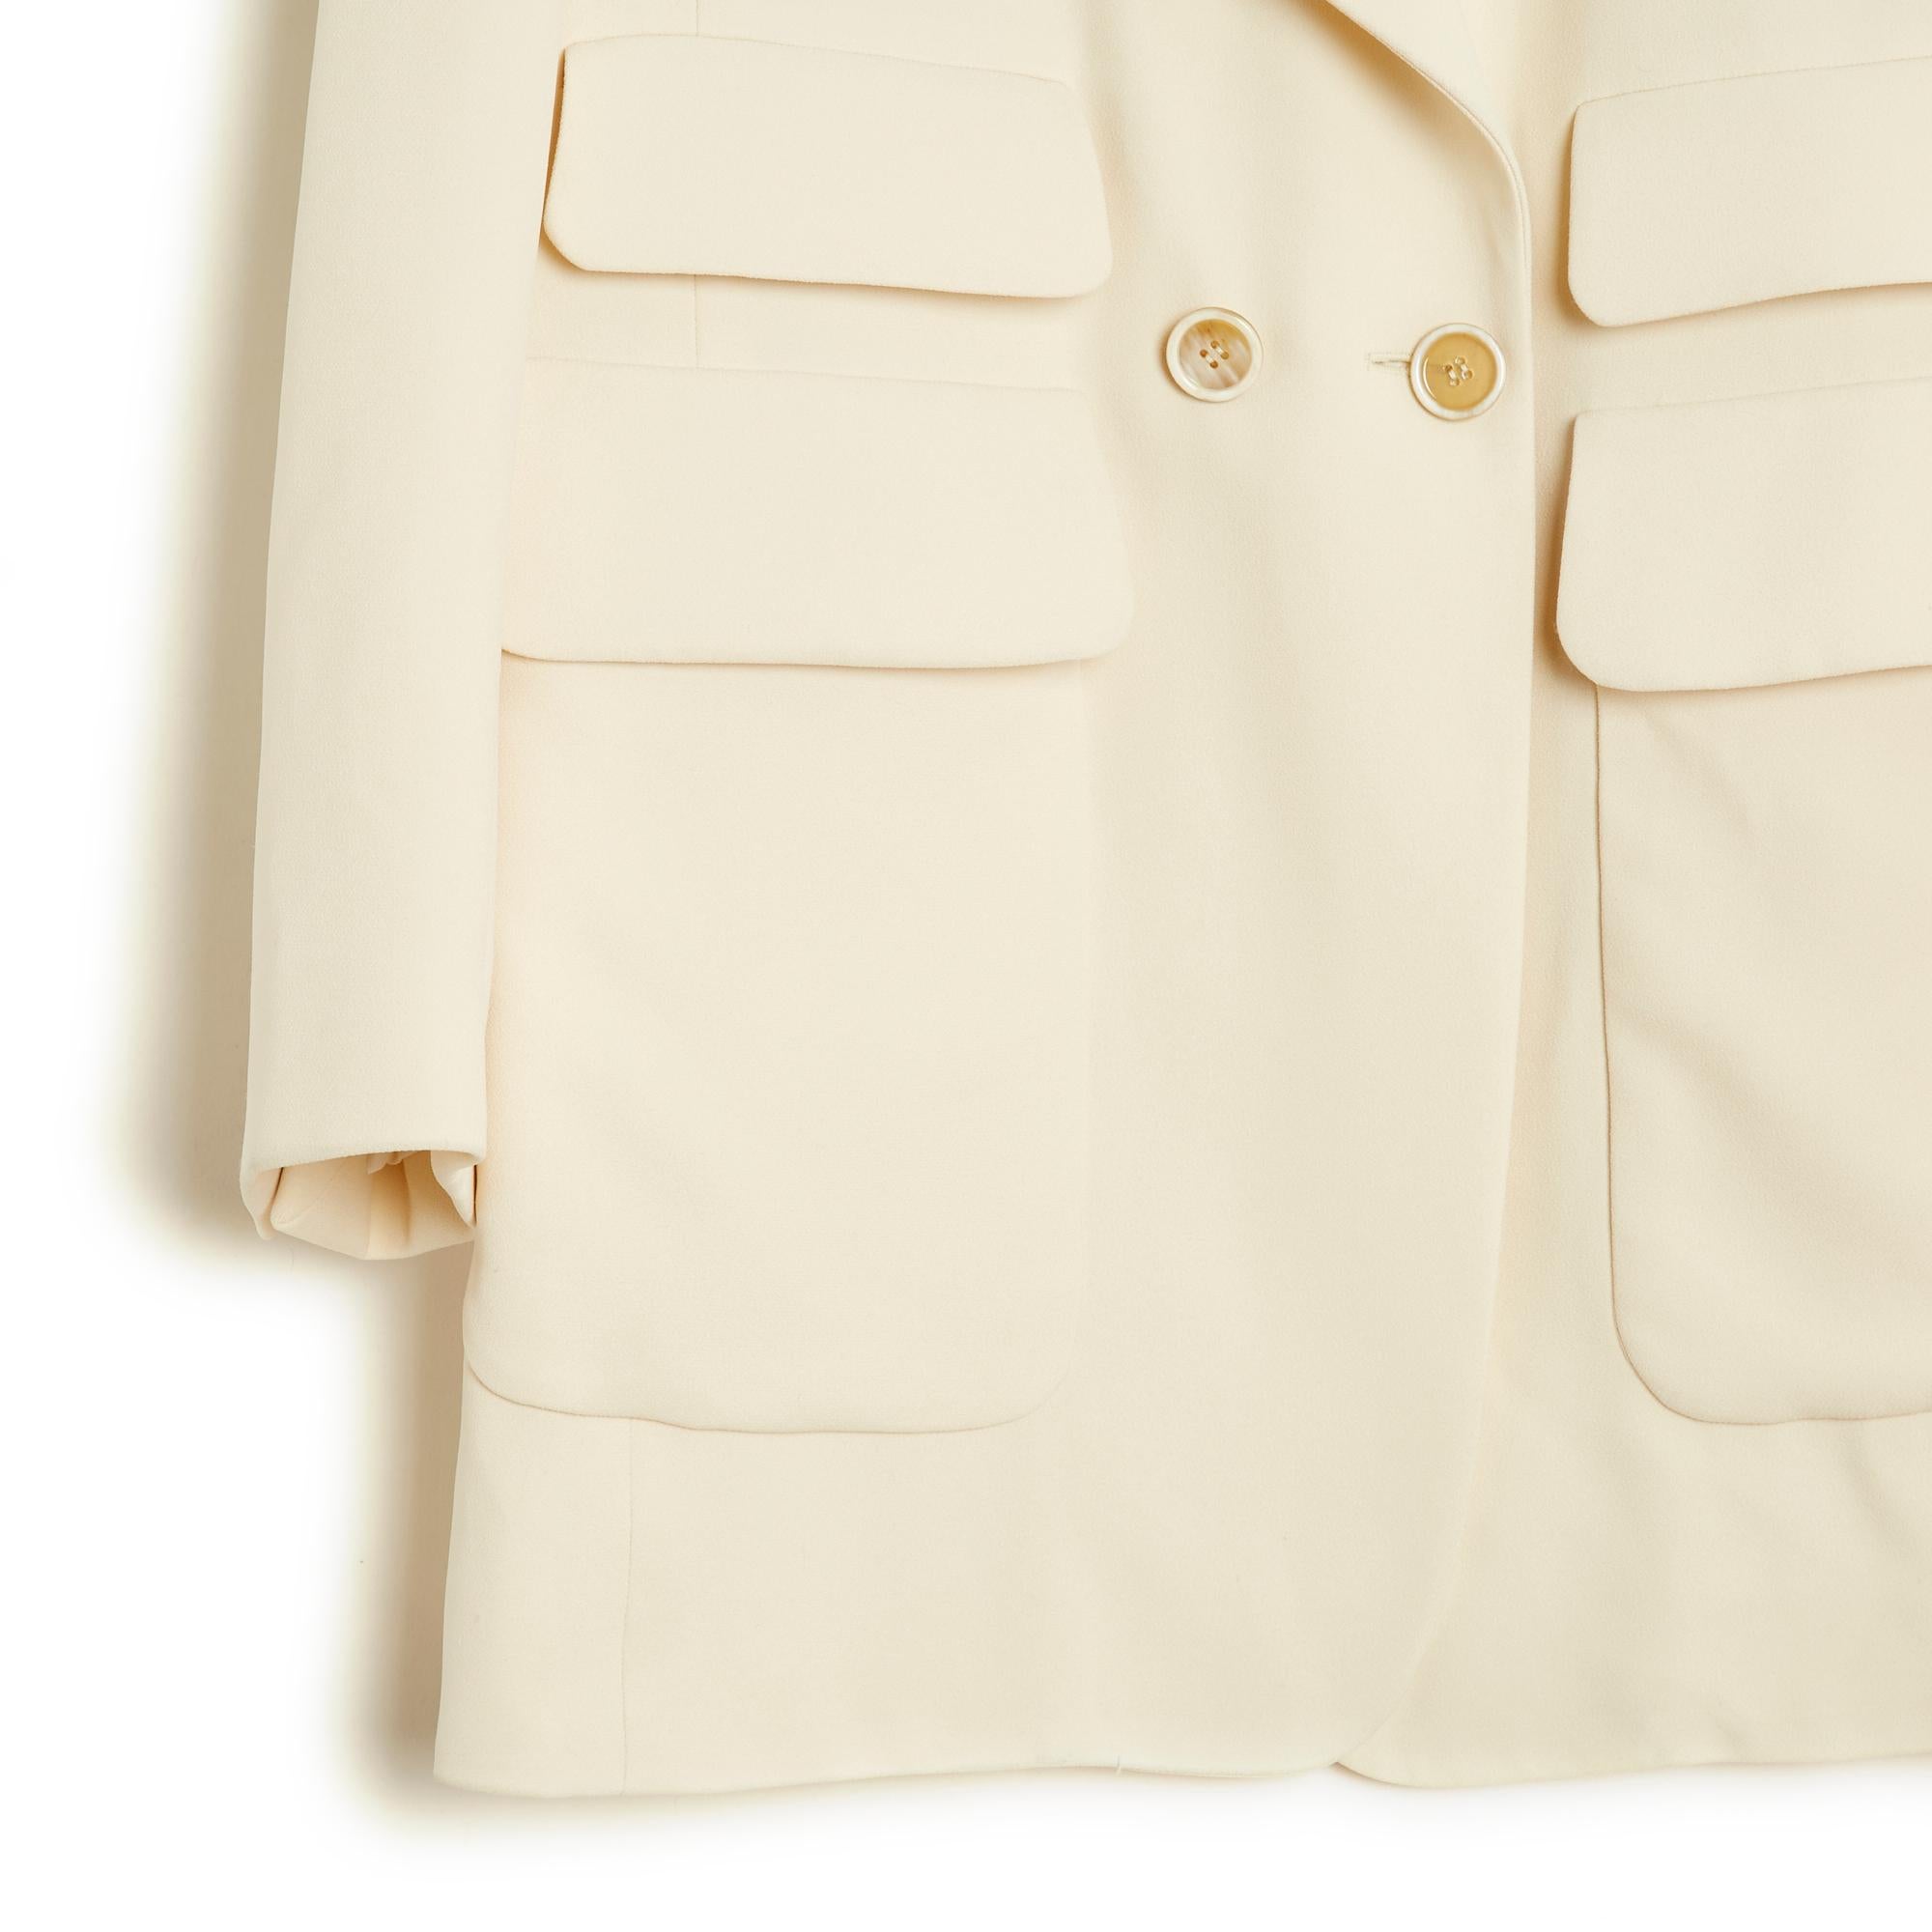 Chloé jacket Spring Summer 2015 collection in acetate crepe and ecru viscose, wide notched collar with cross-buttoning at the front, 4 large lapel pockets including 2 patch pockets, long sleeves slit at the bottom, matching silk lining. Size 42FR: